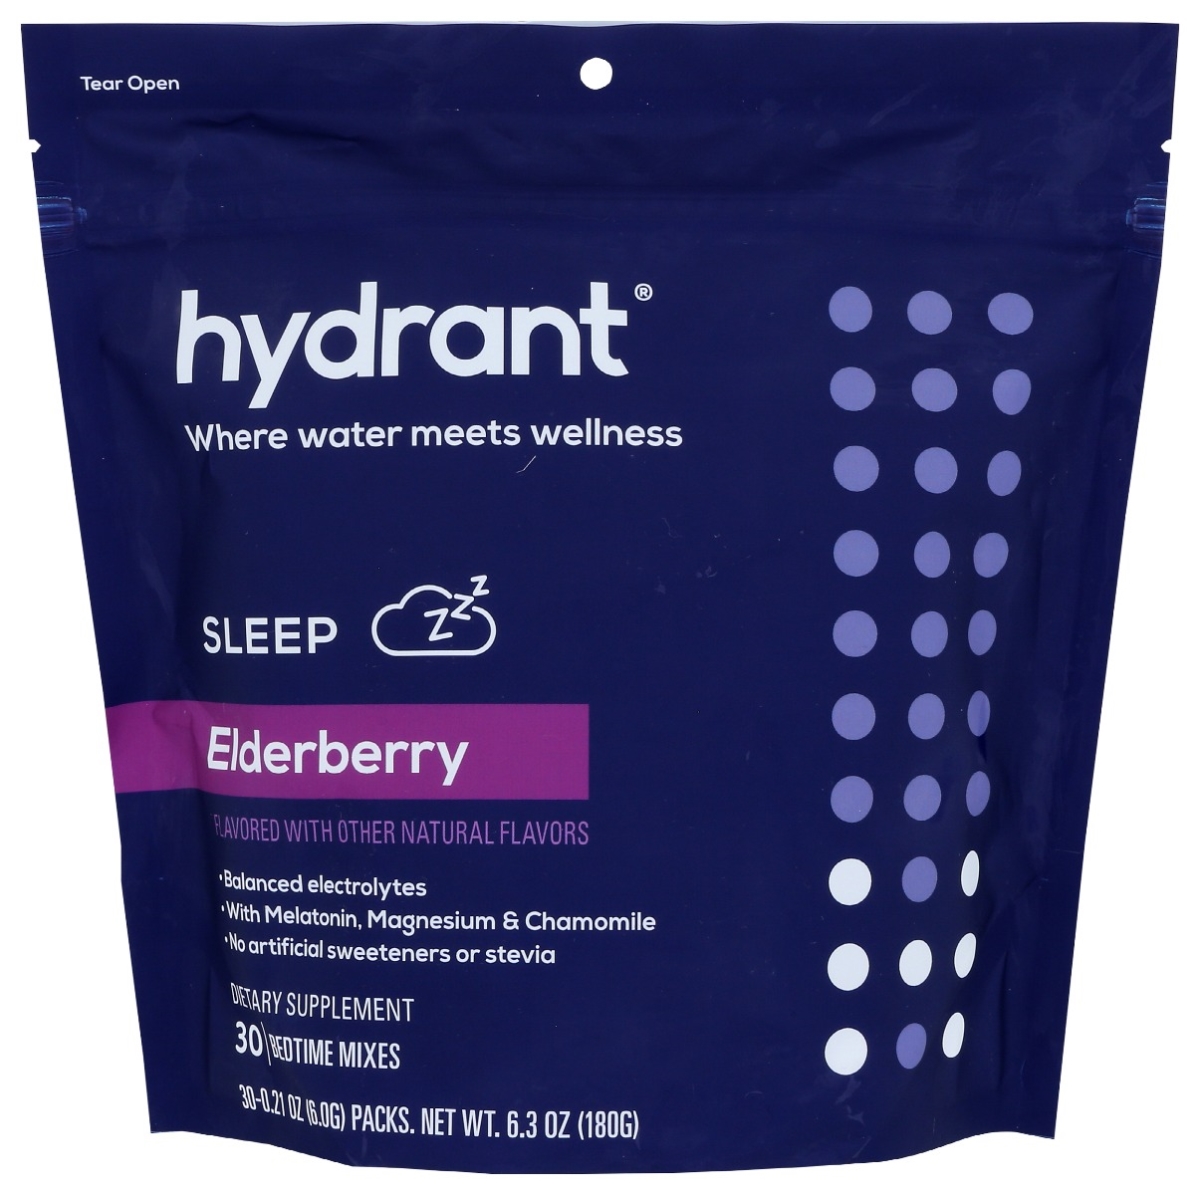 Hydrant Sleep Hydration Powder – Rest and Recovery Drink Mix – Fast-Acting Blend of Melatonin, L-Theanine, GABA, Magnesium & Chamomile – Elderberry Electrolyte Powder (Elderberry, 30 Pack) (B08VFBBX9S) - 850005409786